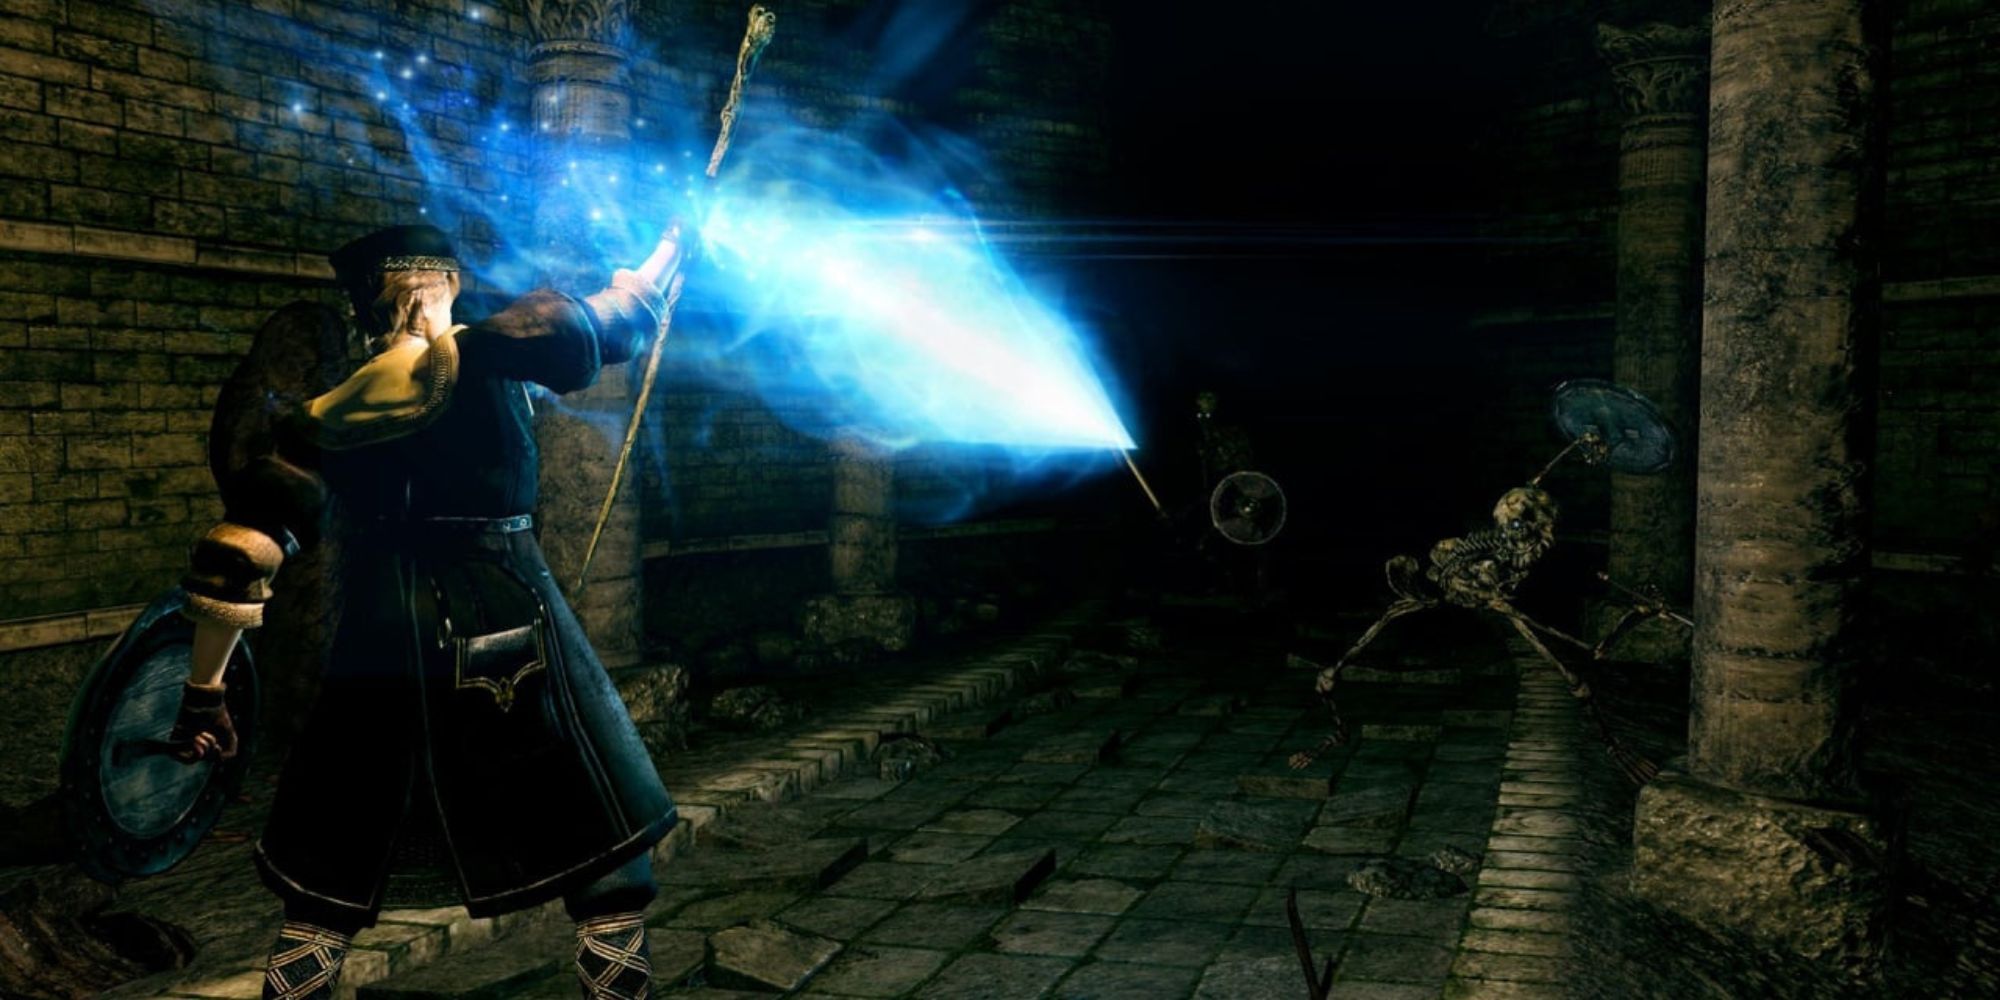 A player casting a spell at skeletons down a dark tunnel in Dark Souls